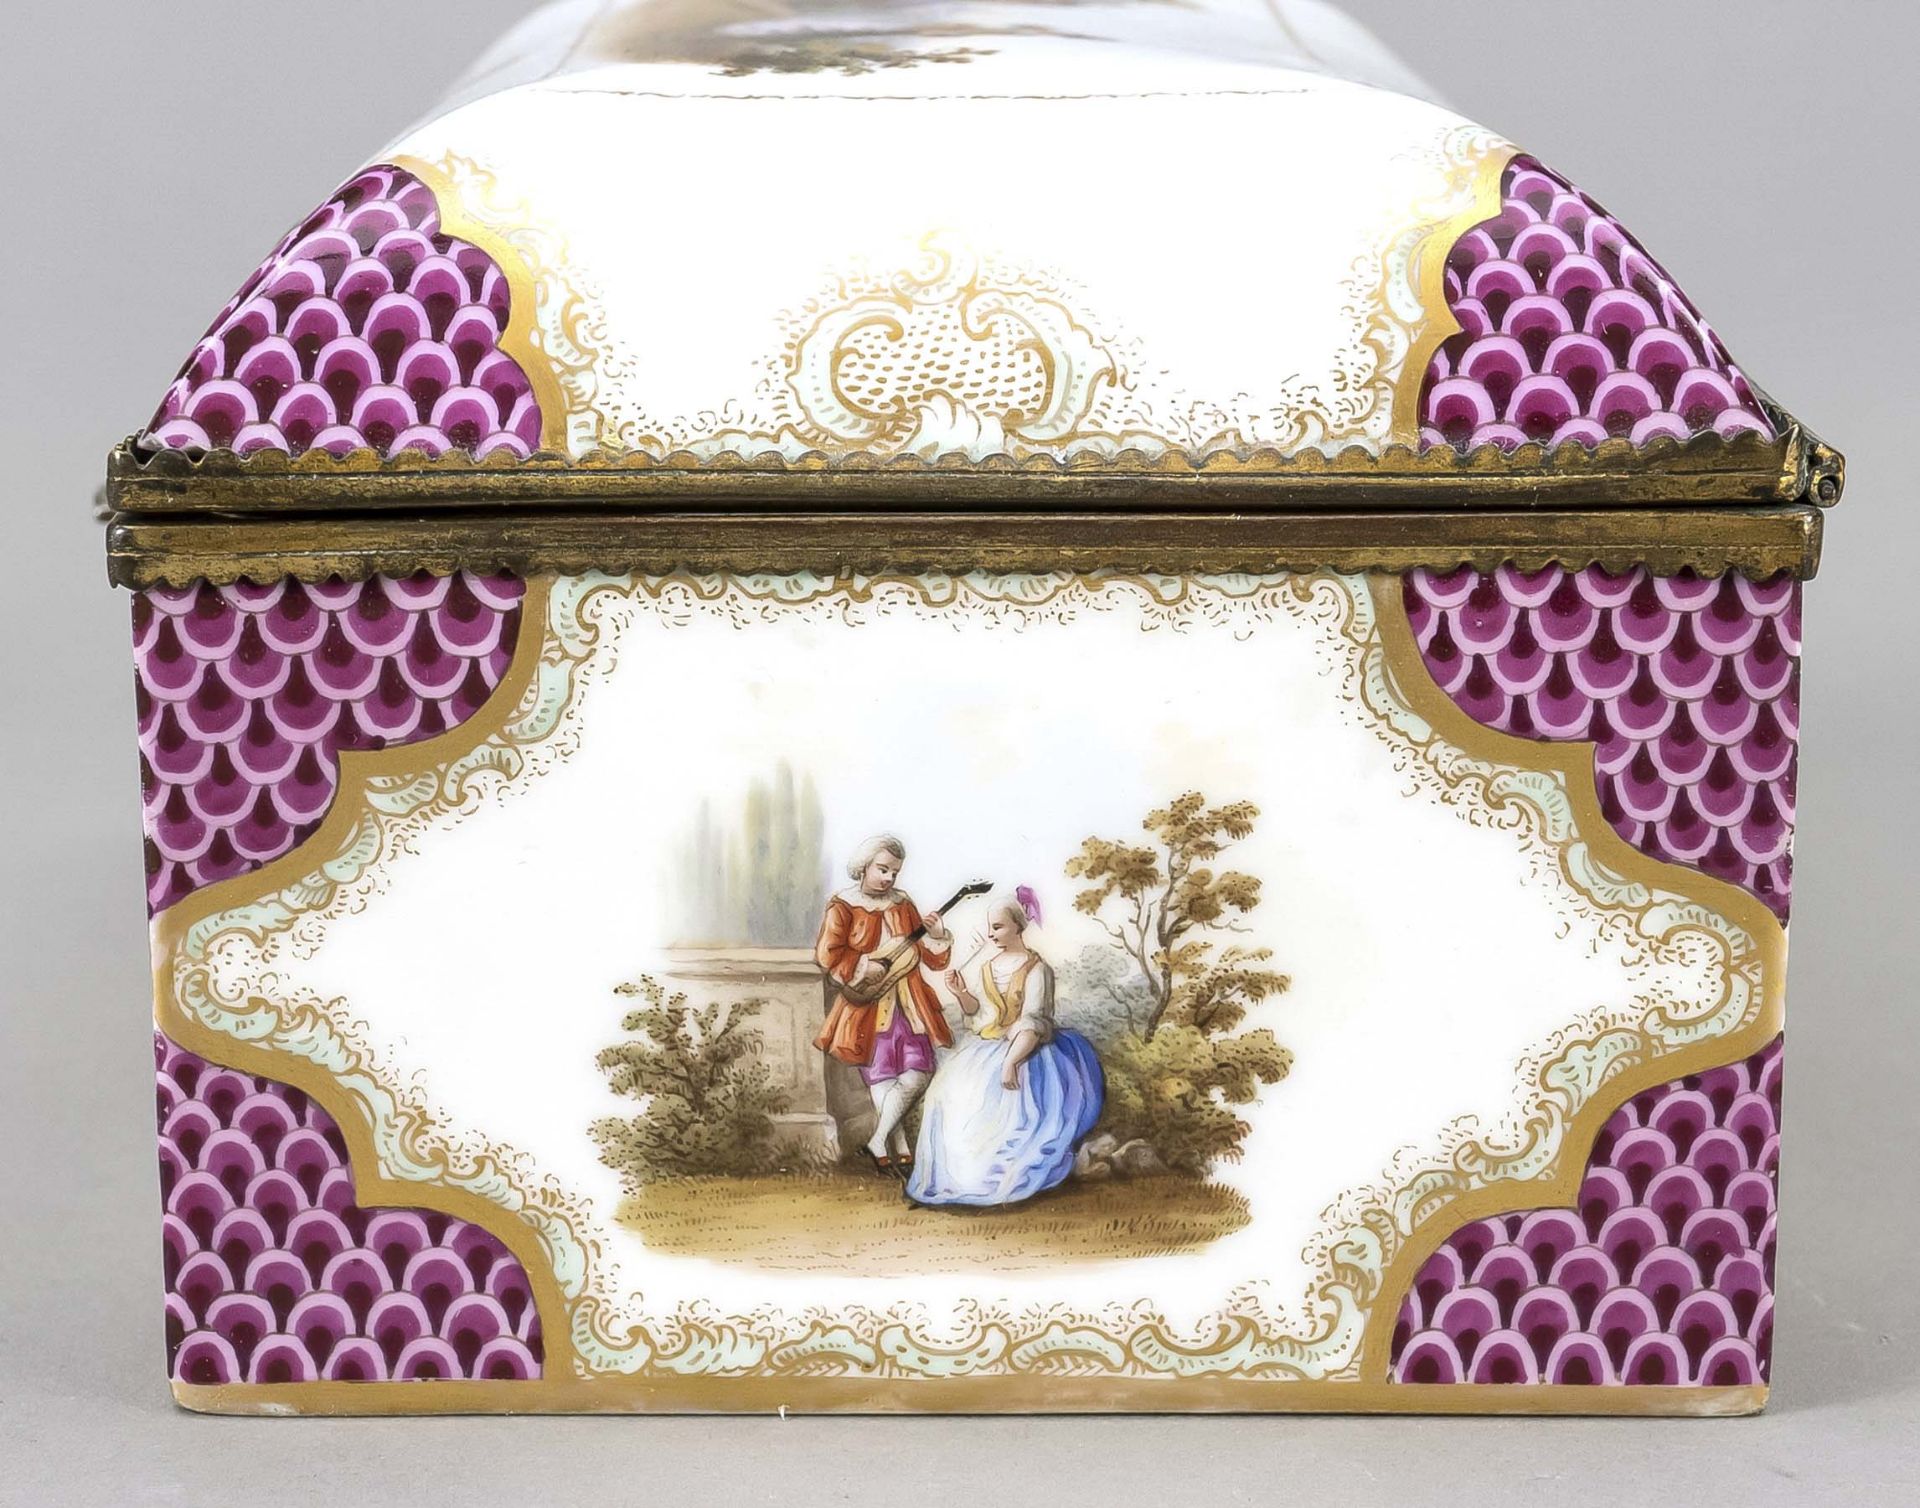 Lidded box in the style of Meissen, w. 18/19th c., fine polychrome painting with gallant couples - Image 7 of 7